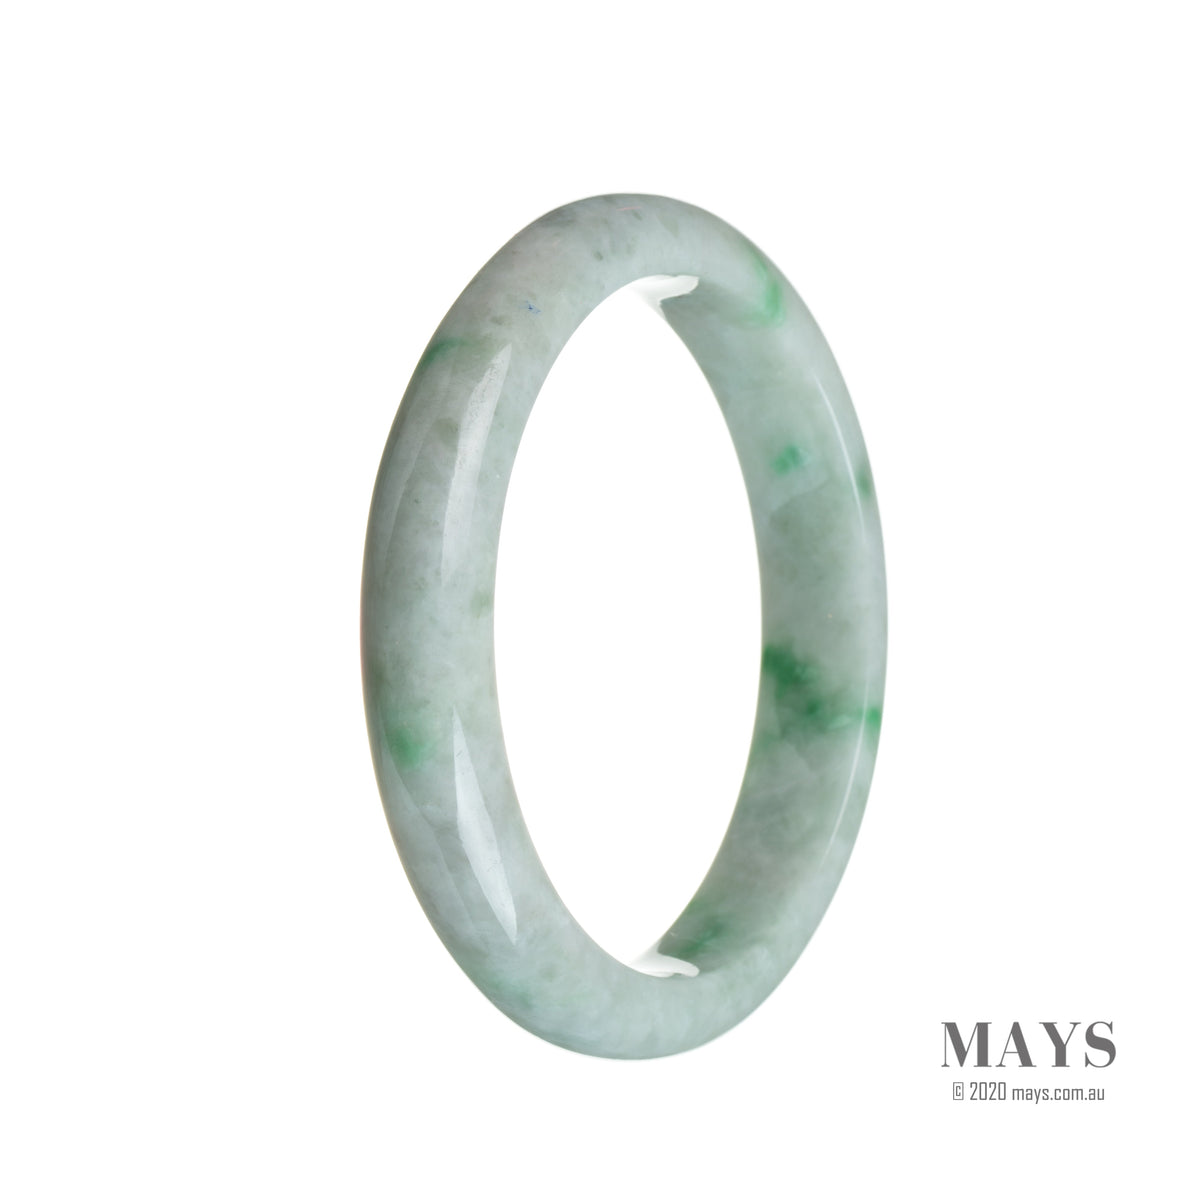 A close-up of a beautiful green and white patterned jade bracelet in the shape of a half moon, measuring 58mm.